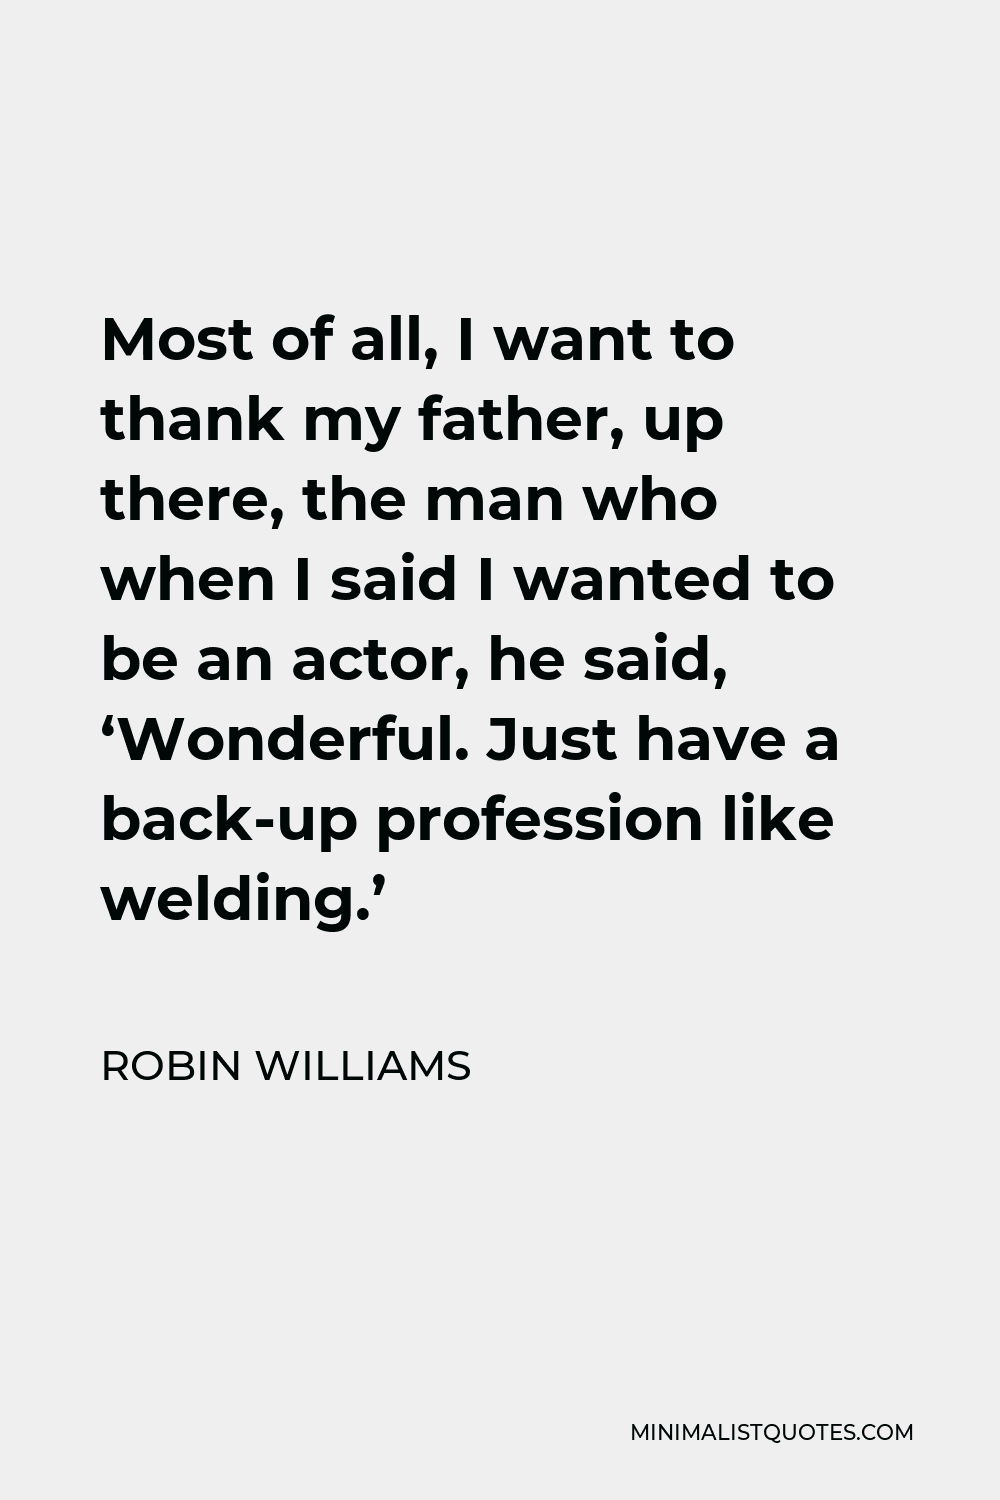 Robin Williams Quote - Most of all, I want to thank my father, up there, the man who when I said I wanted to be an actor, he said, ‘Wonderful. Just have a back-up profession like welding.’